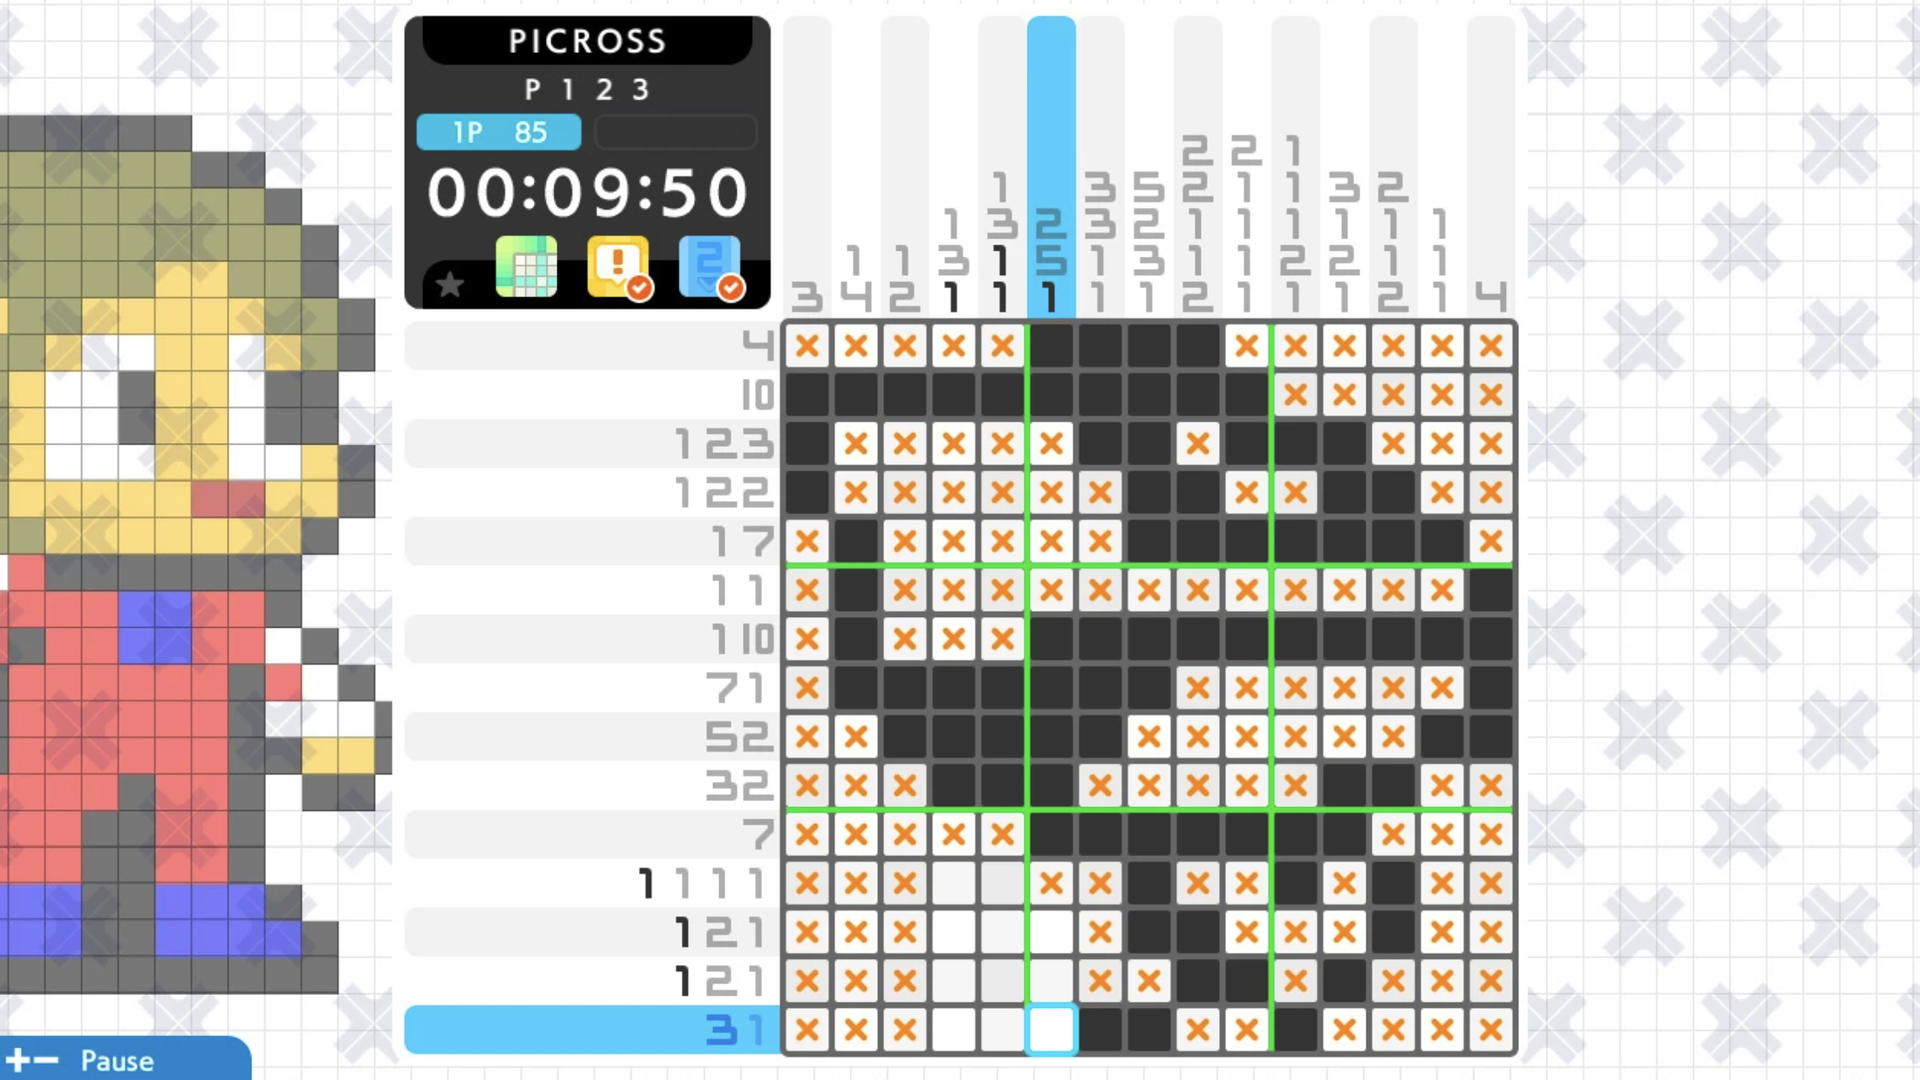 A "picross" puzzle grid